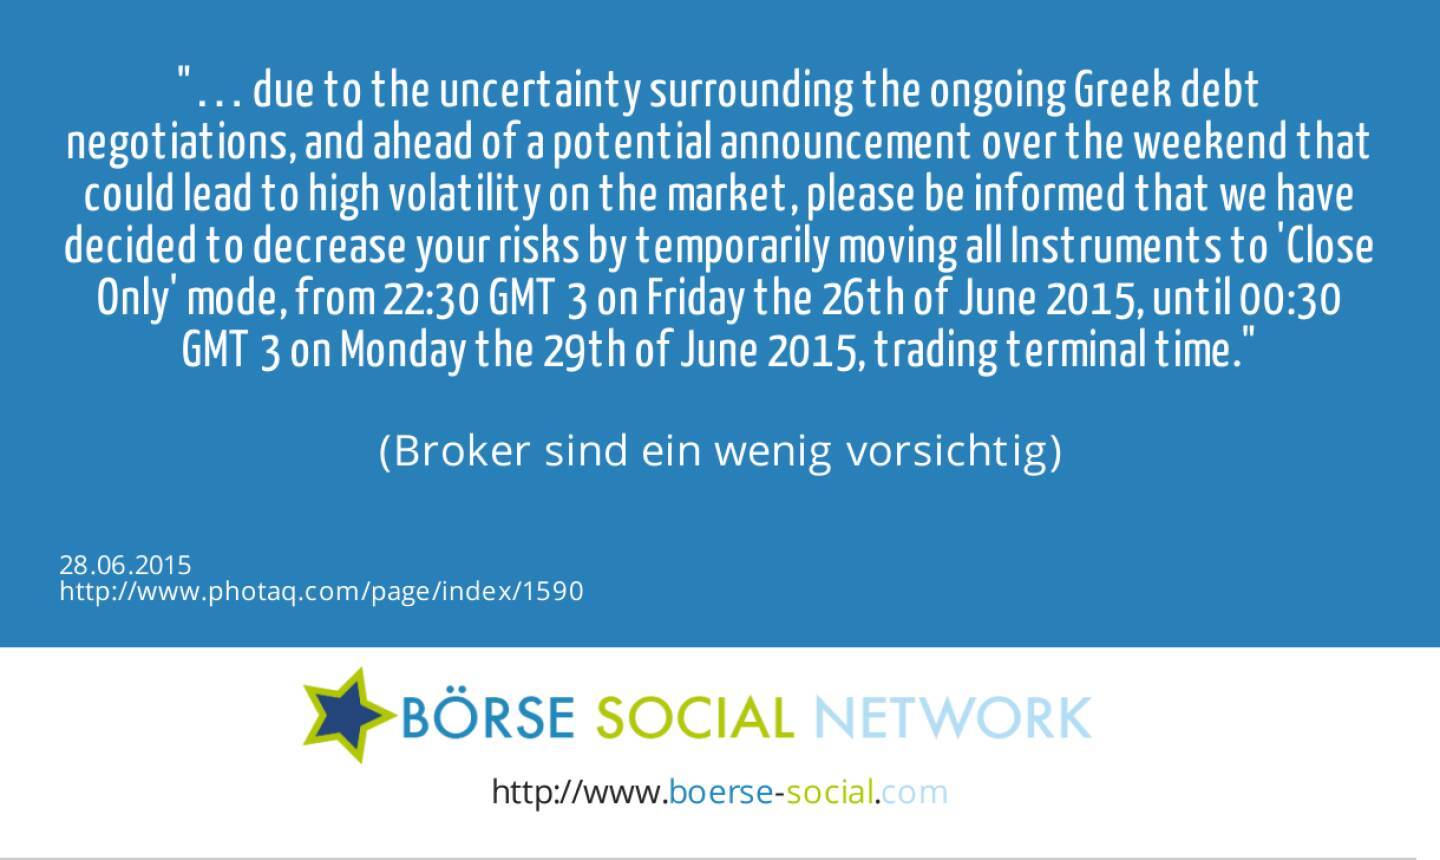 … due to the uncertainty surrounding the ongoing Greek debt negotiations, and ahead of a potential announcement over the weekend that could lead to high volatility on the market, please be informed that we have decided to decrease your risks by temporarily moving all Instruments to 'Close Only' mode, from 22:30 GMT+3 on Friday the 26th of June 2015, until 00:30 GMT+3 on Monday the 29th of June 2015, trading terminal time.<br><br> (Broker sind ein wenig vorsichtig)